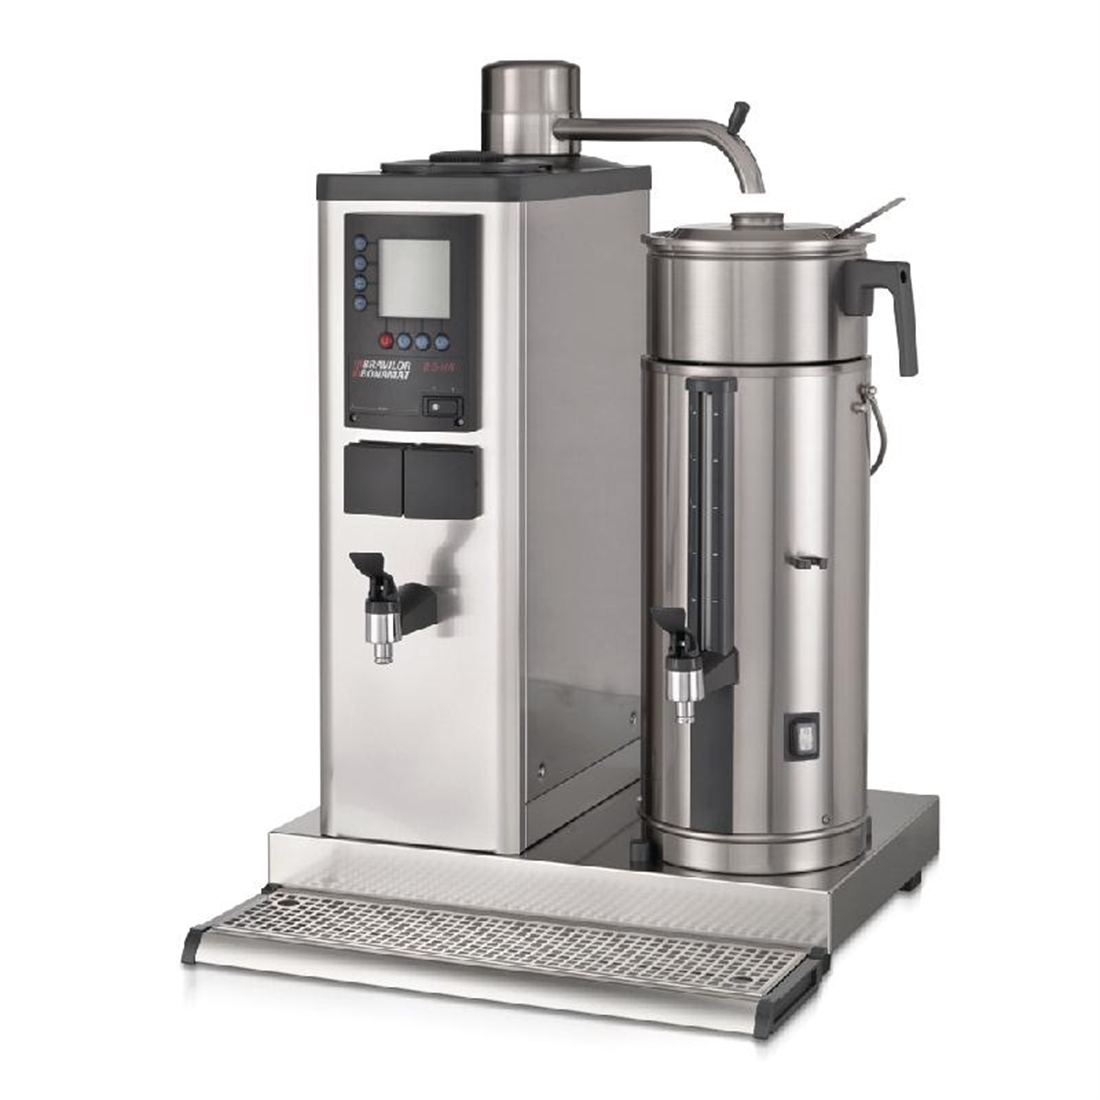 Bravilor B10 HWR Bulk Coffee Brewer with 10Ltr Coffee Urn and Hot Water Tap 3 Phase